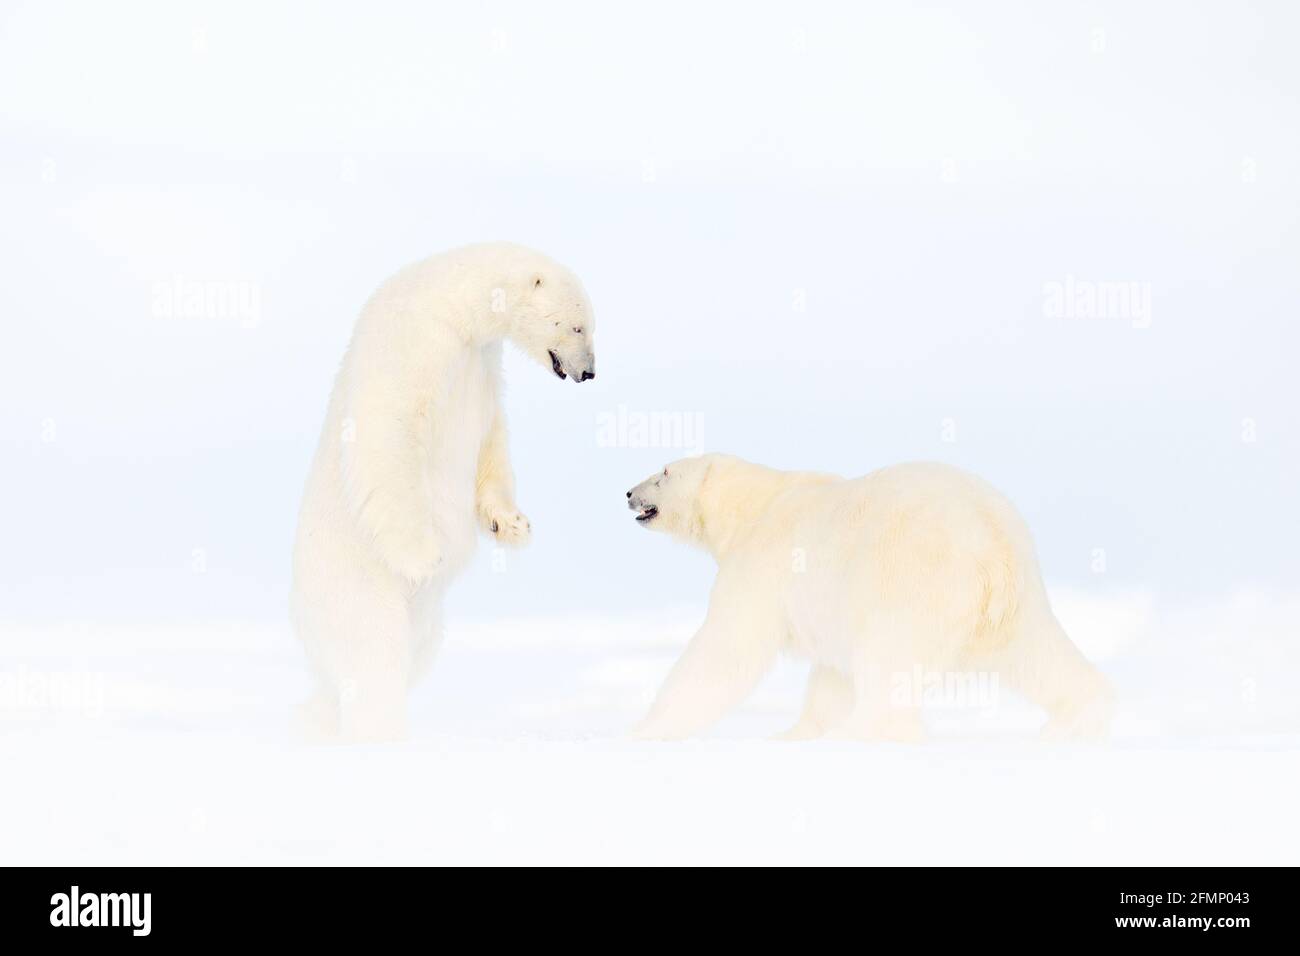 Polar bear dancing fight on the ice. Two bears love on drifting ice with snow, white animals in nature habitat, Svalbard, Norway. Animals playing in s Stock Photo